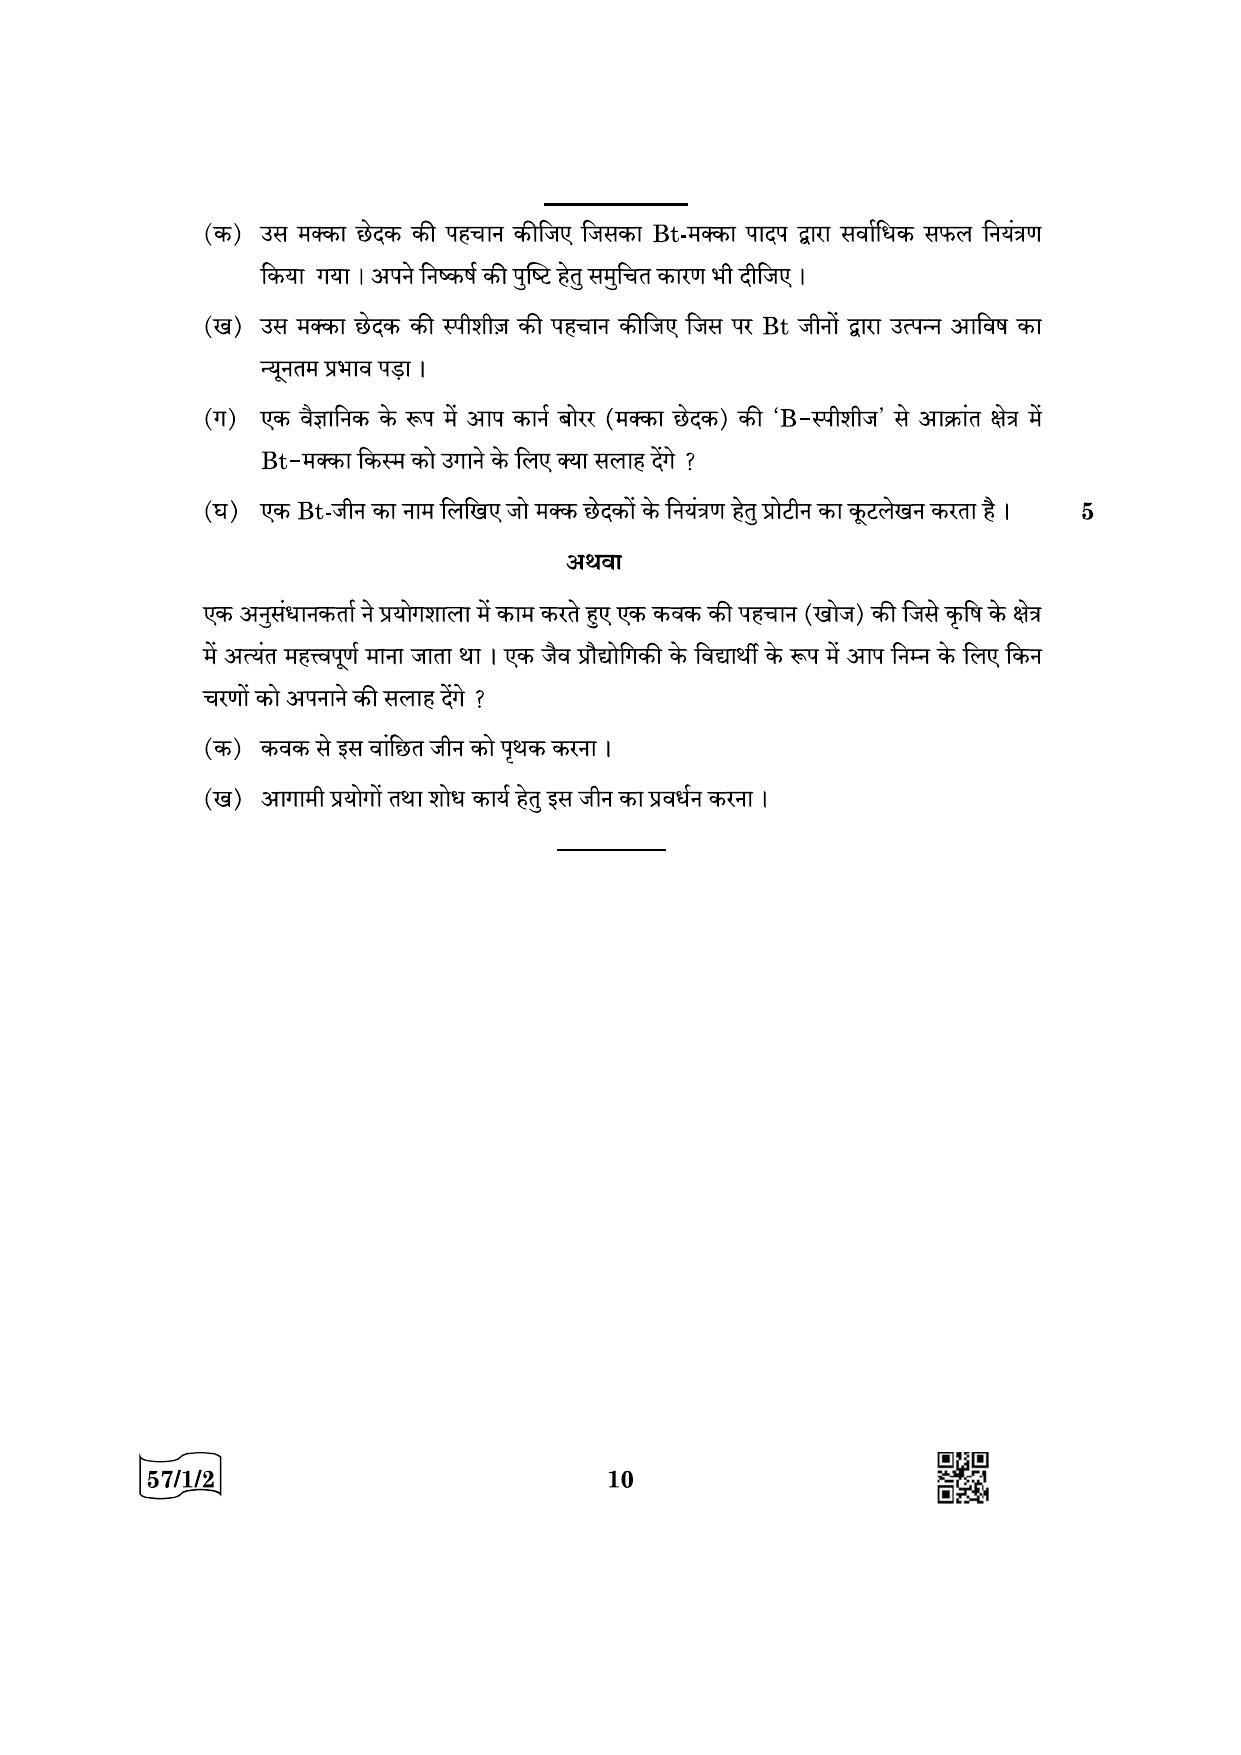 CBSE Class 12 57-1-2 Biology 2022 Question Paper - Page 10